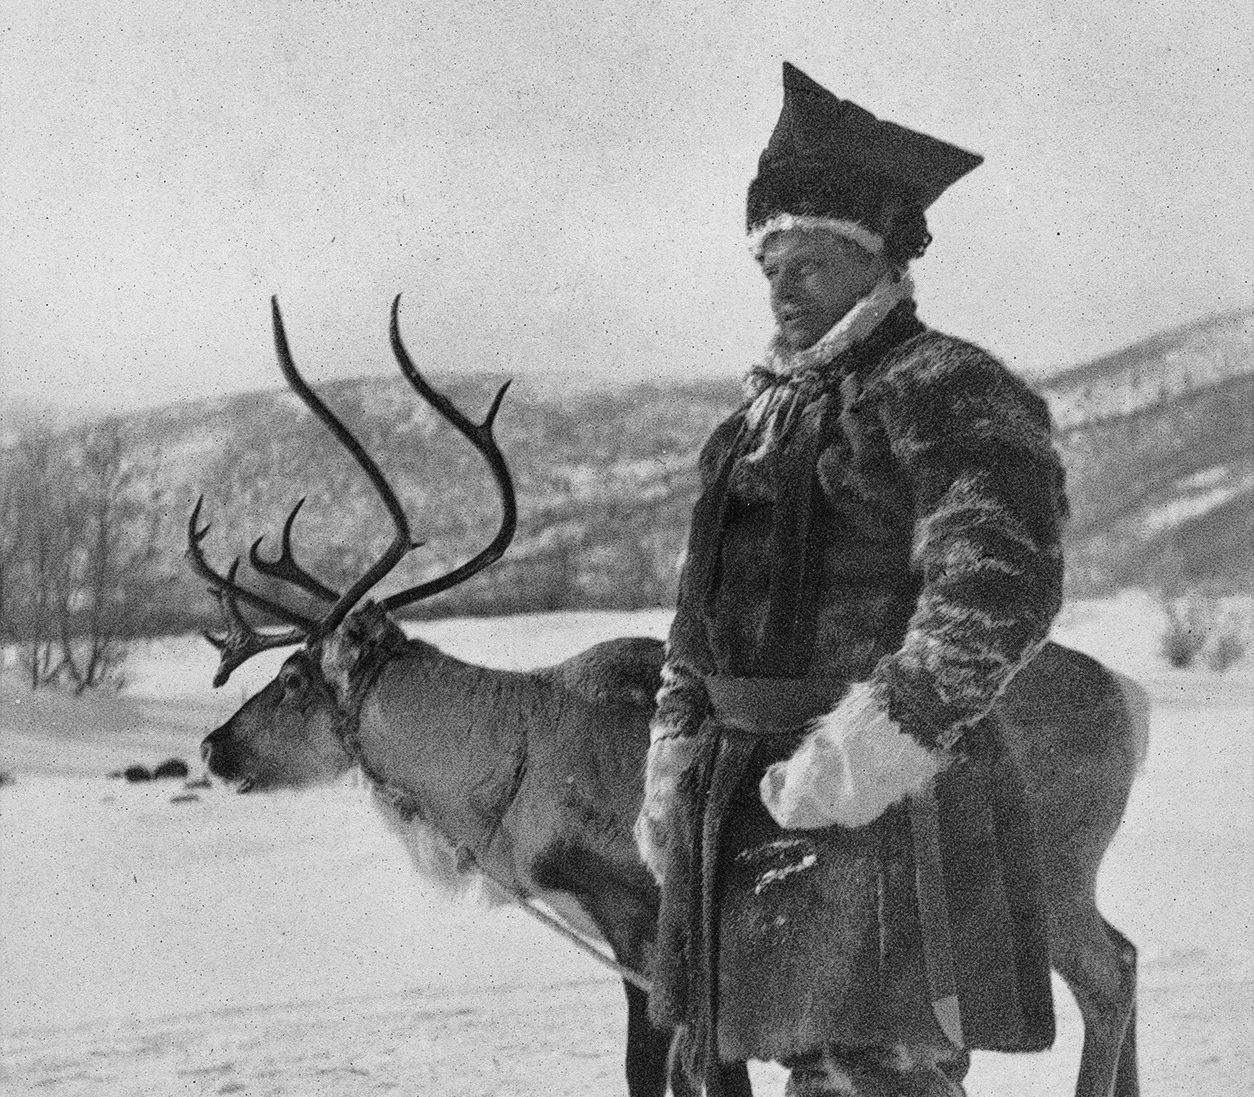 A black and white image of a Sami herder with his reindeer